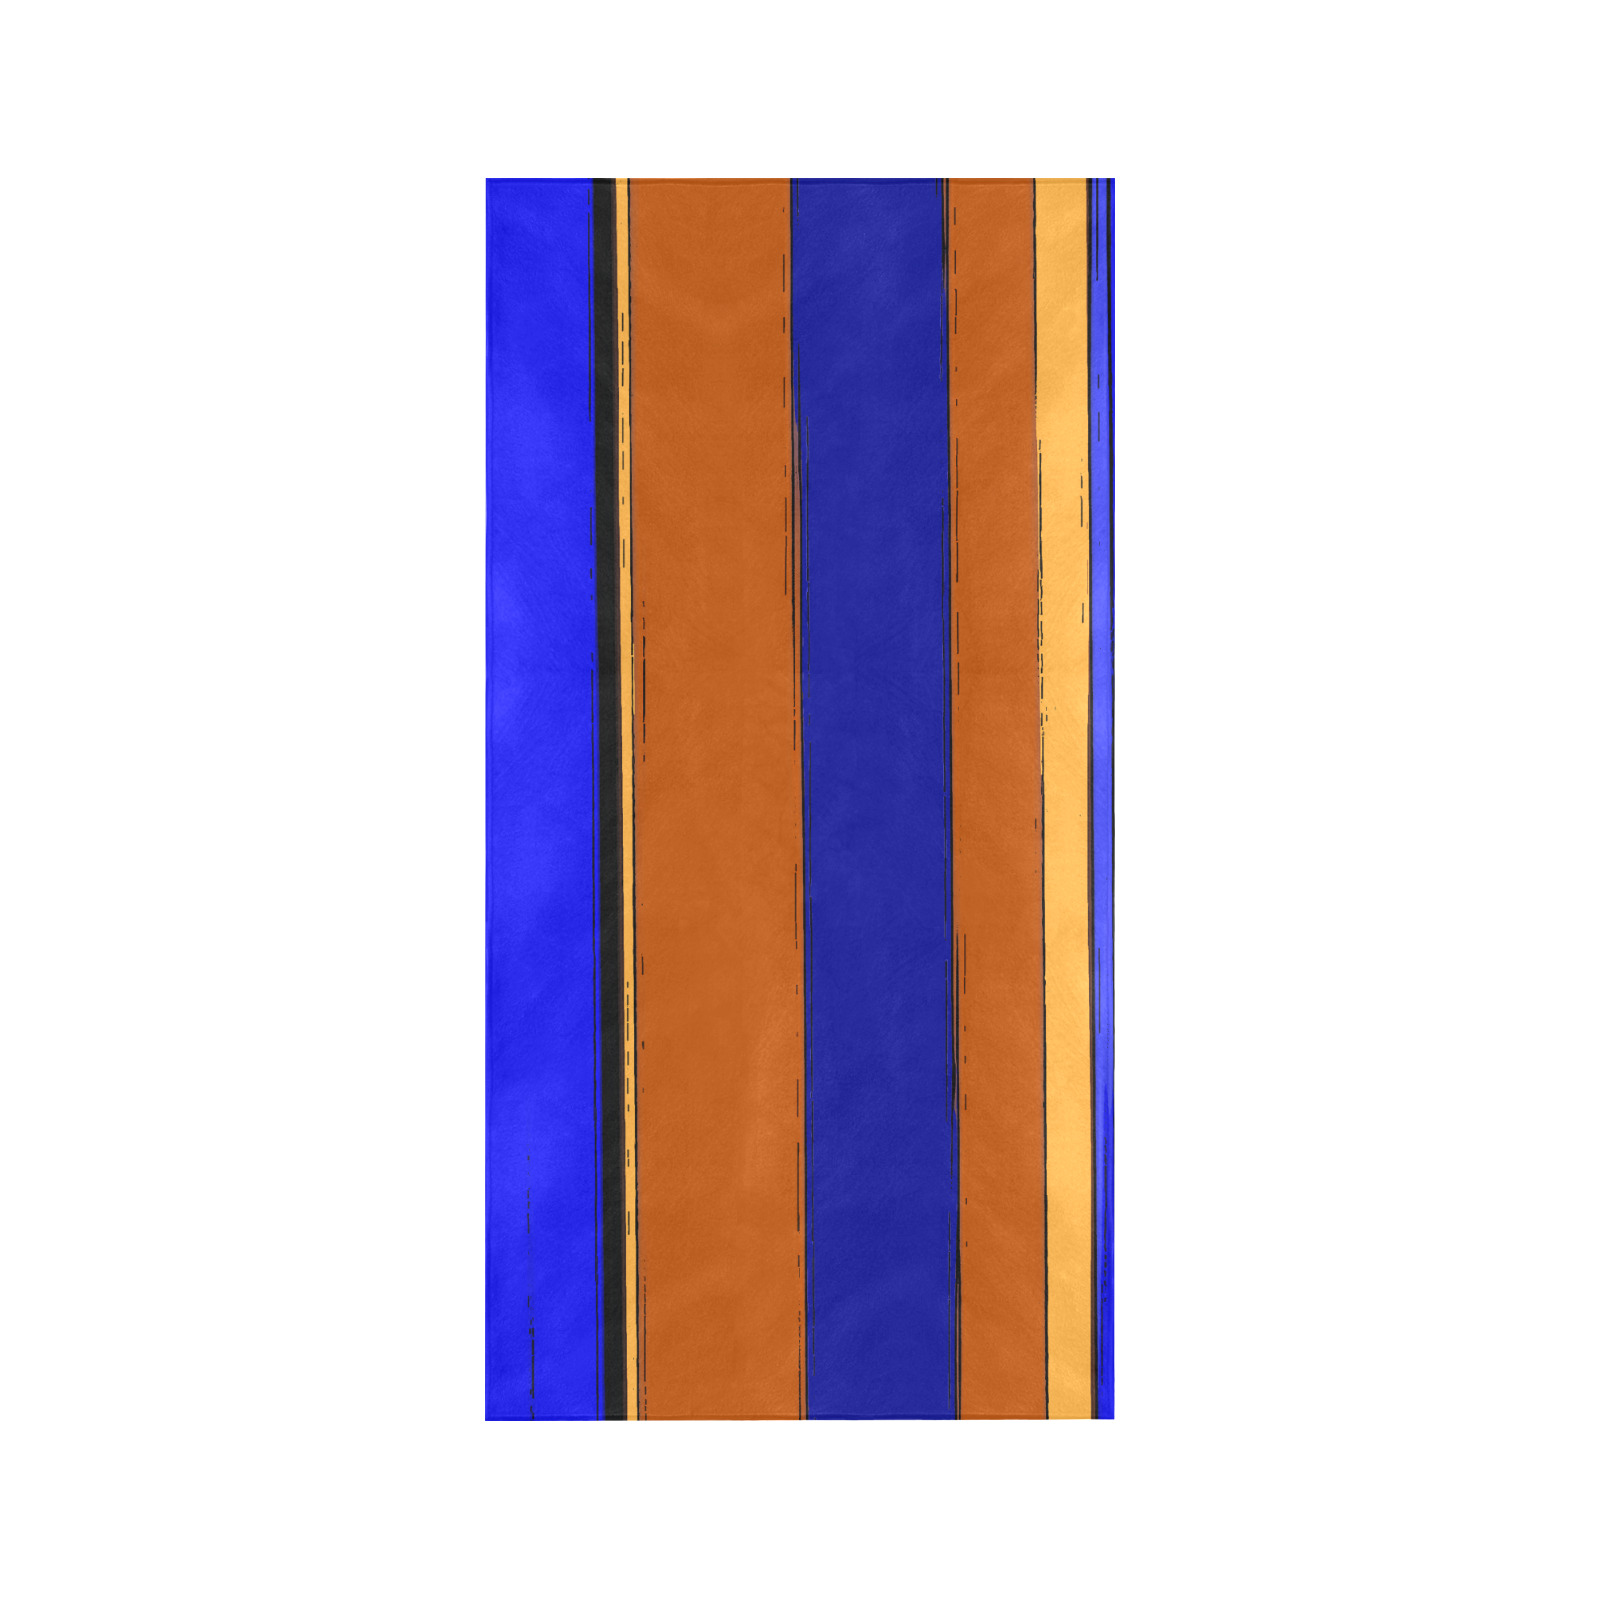 Abstract Blue And Orange 930 Beach Towel 30"x 60"